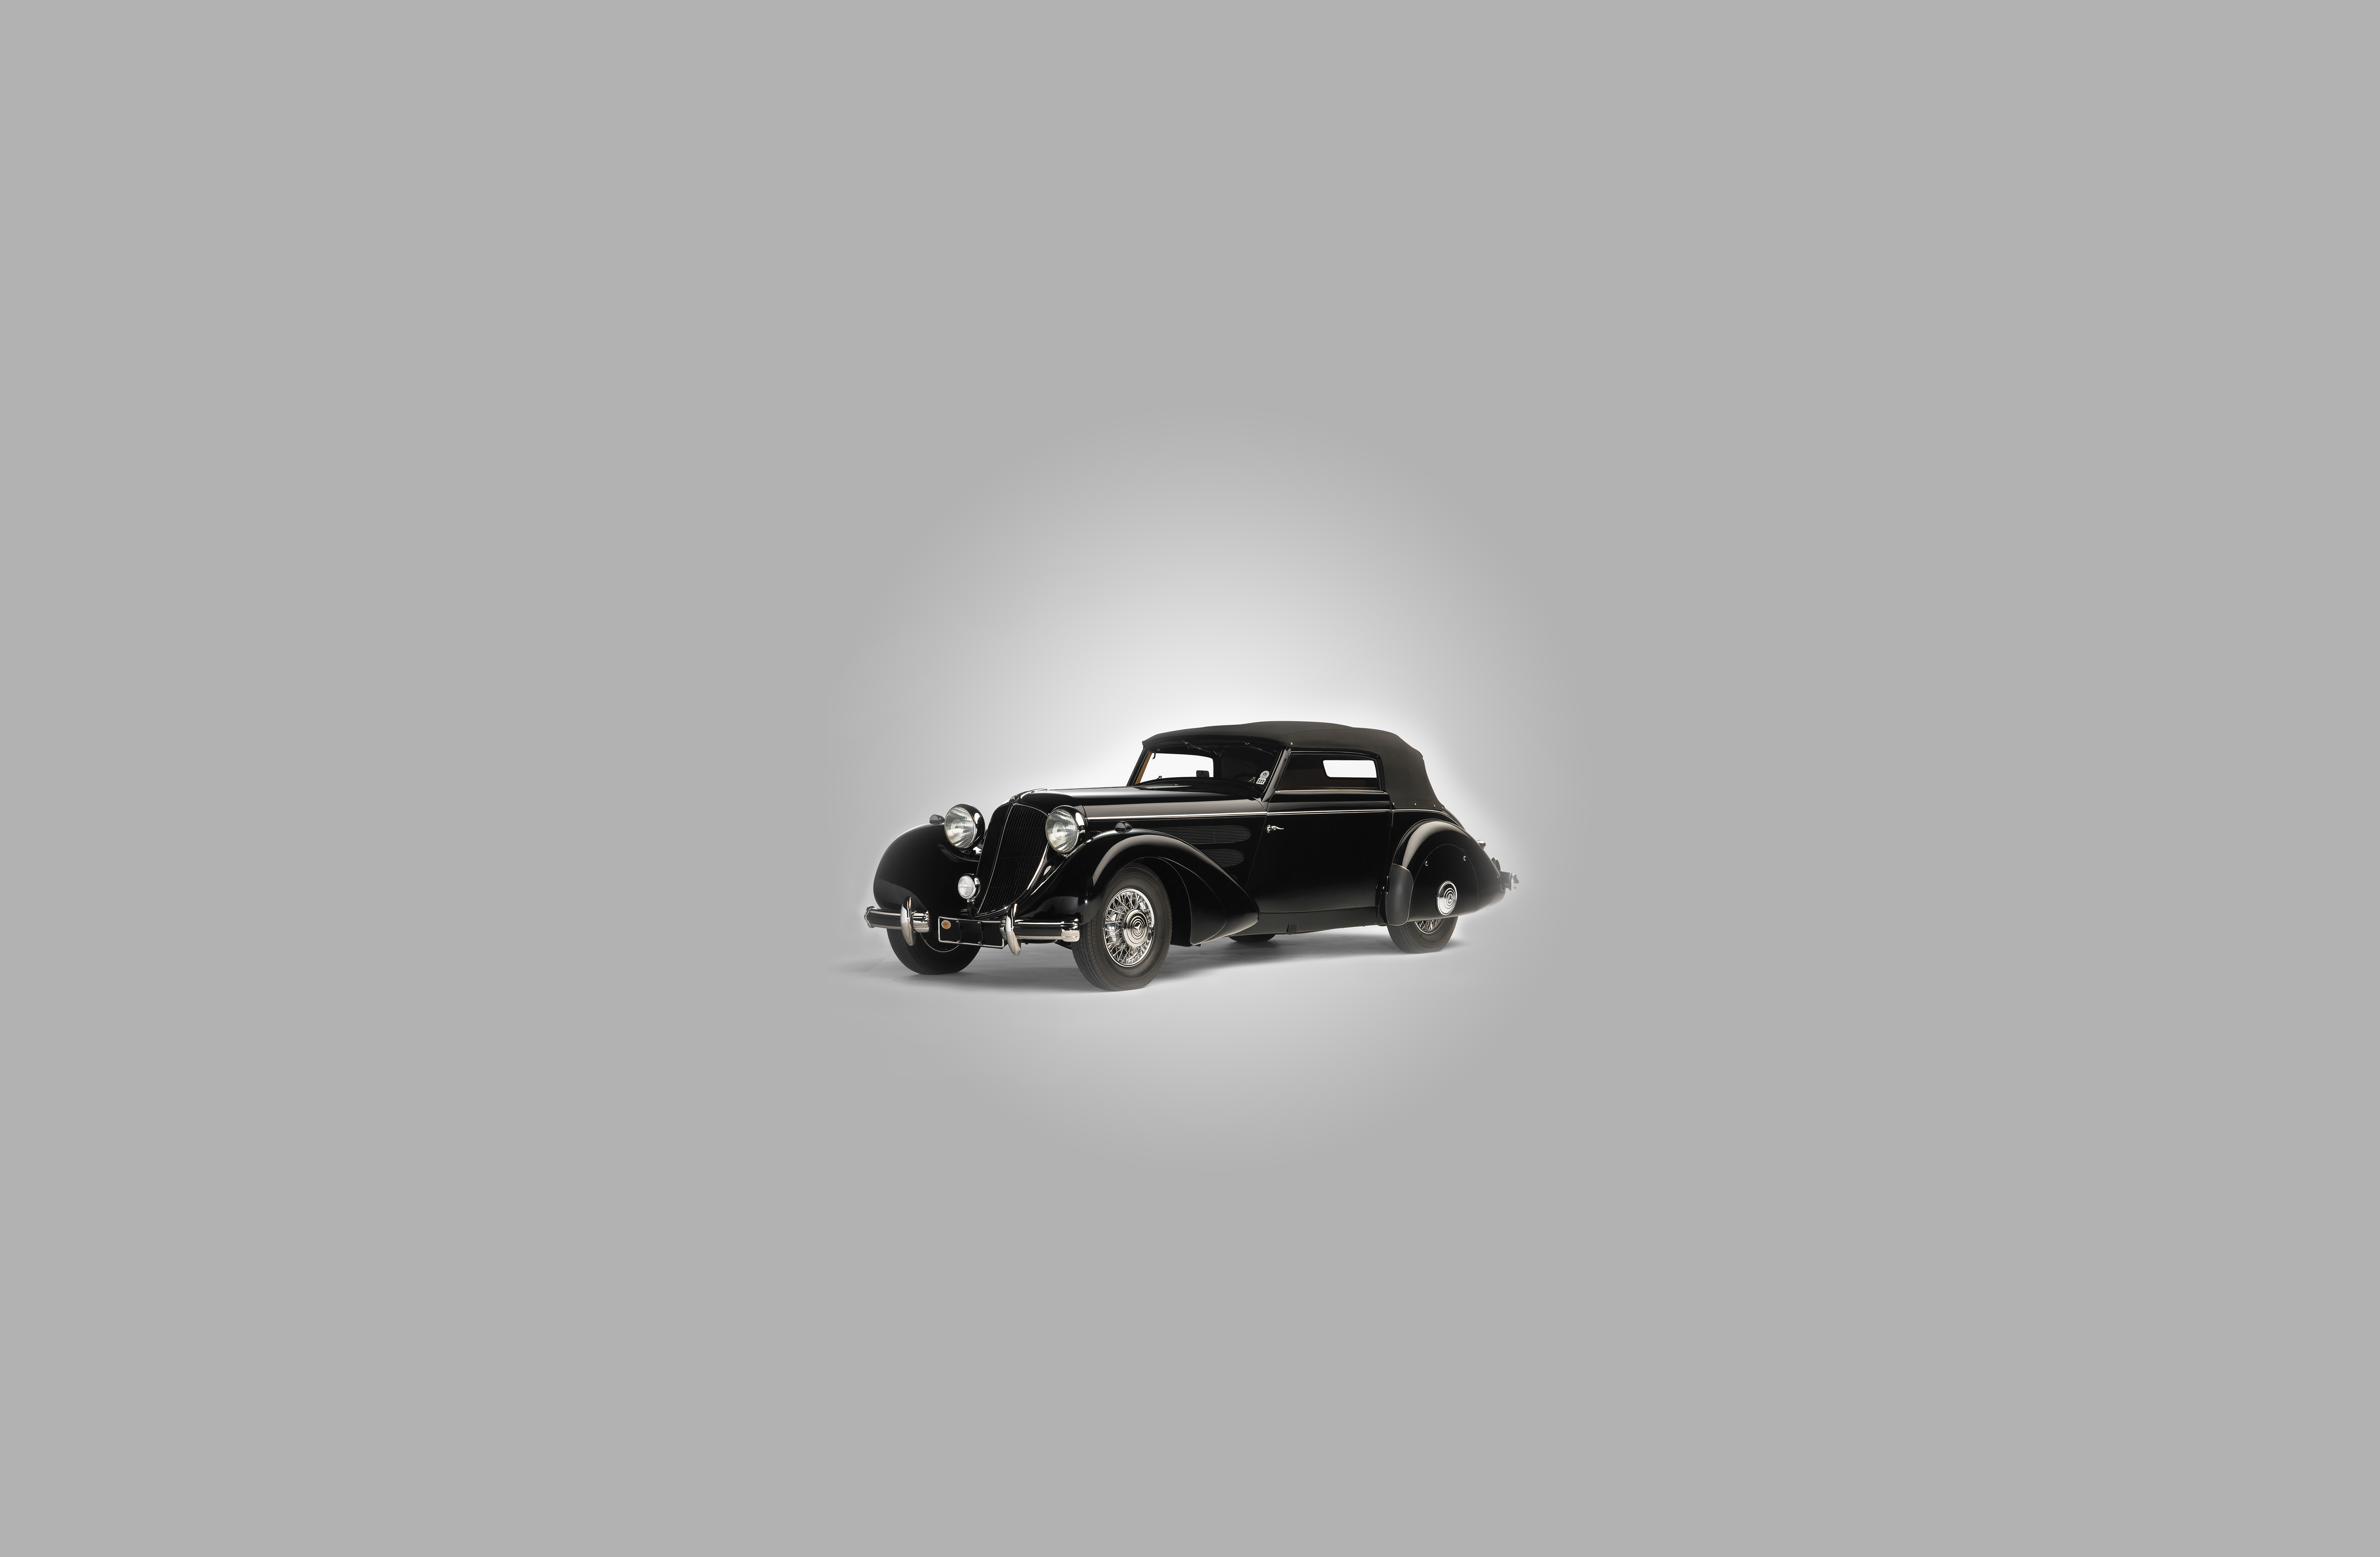 Car Old Car Black Cars Gray Background Conciseness 13094x8567